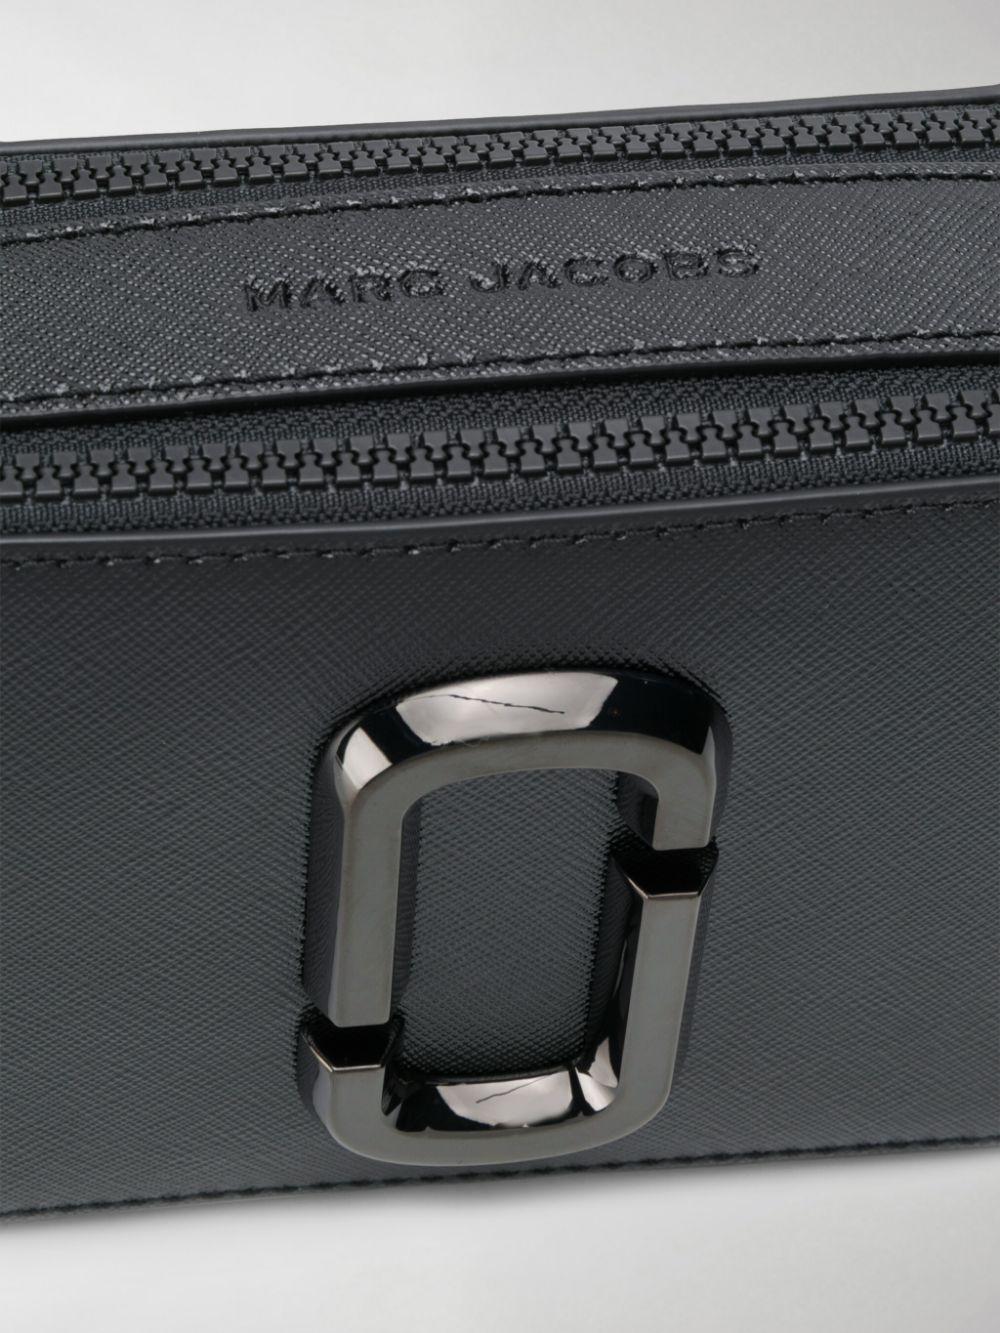 Marc Jacobs Leather Snapshot Dtm Bag in Black - Save 69% - Lyst